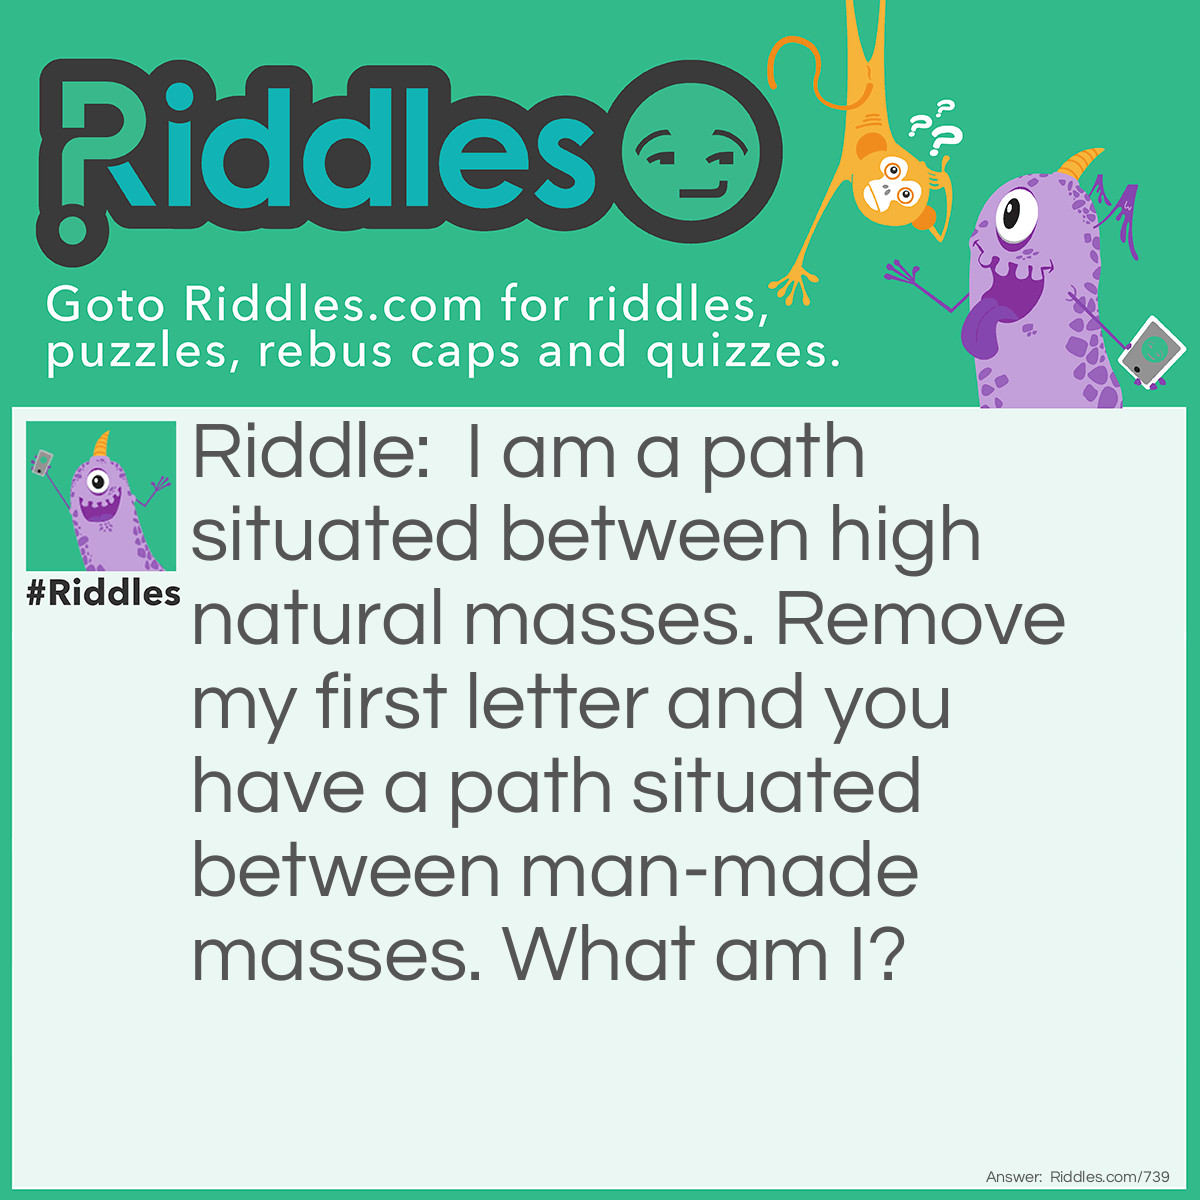 Riddle: I am a path situated between high natural masses. Remove my first letter and you have a path situated between man-made masses.
What am I? Answer: A Valley. 